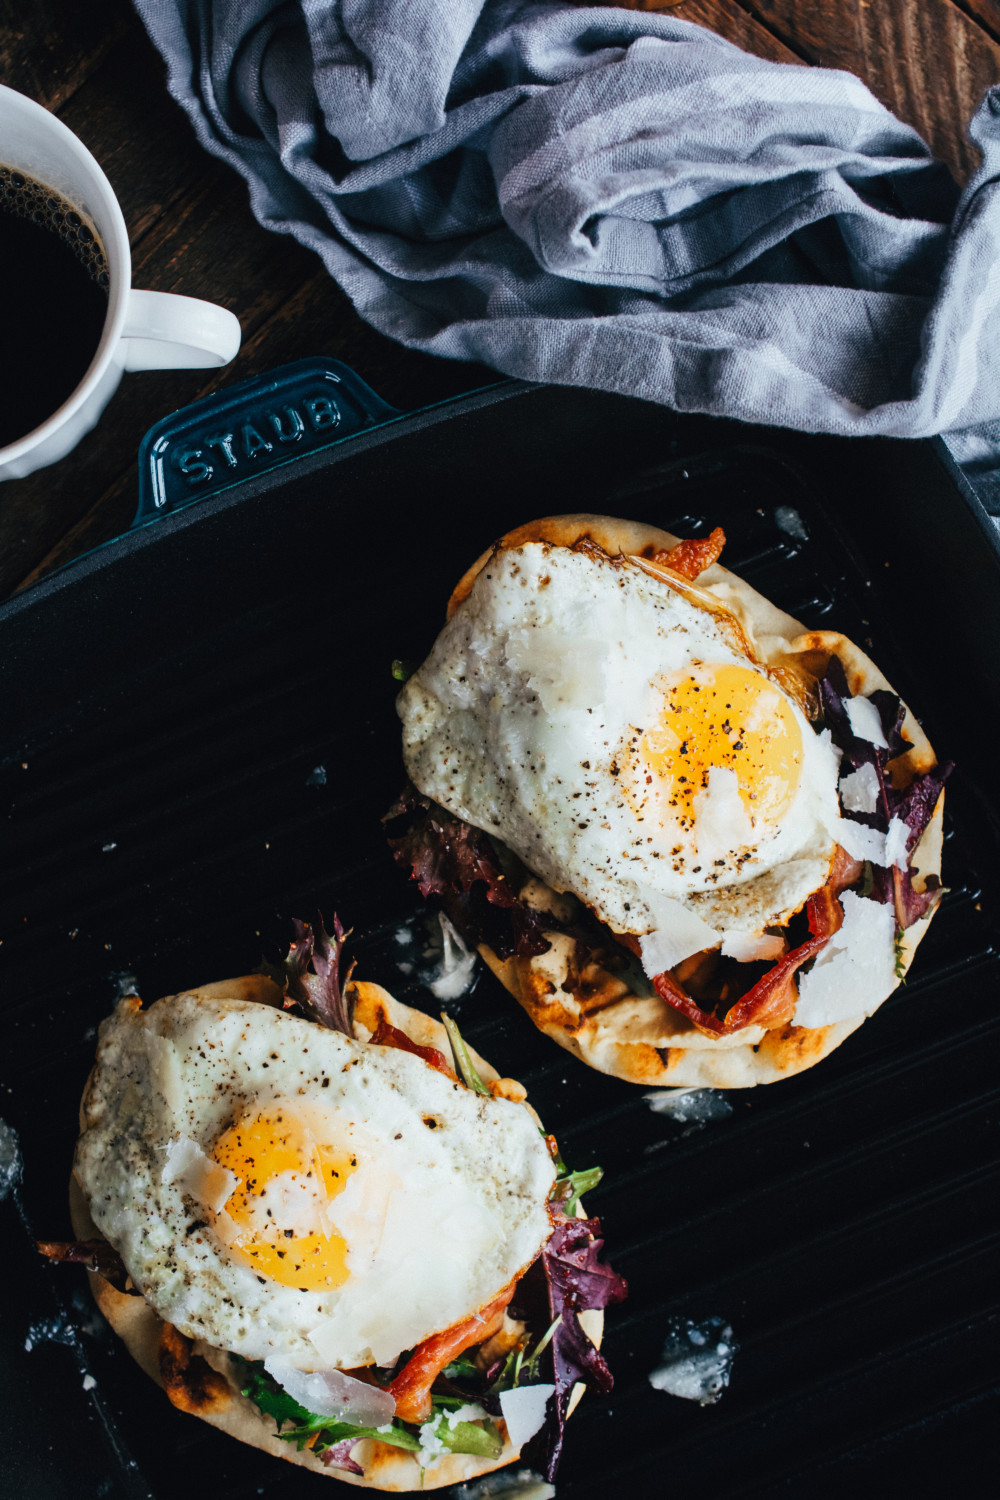 Fried Egg Flatbread with Greens, Bacon and Parmesan